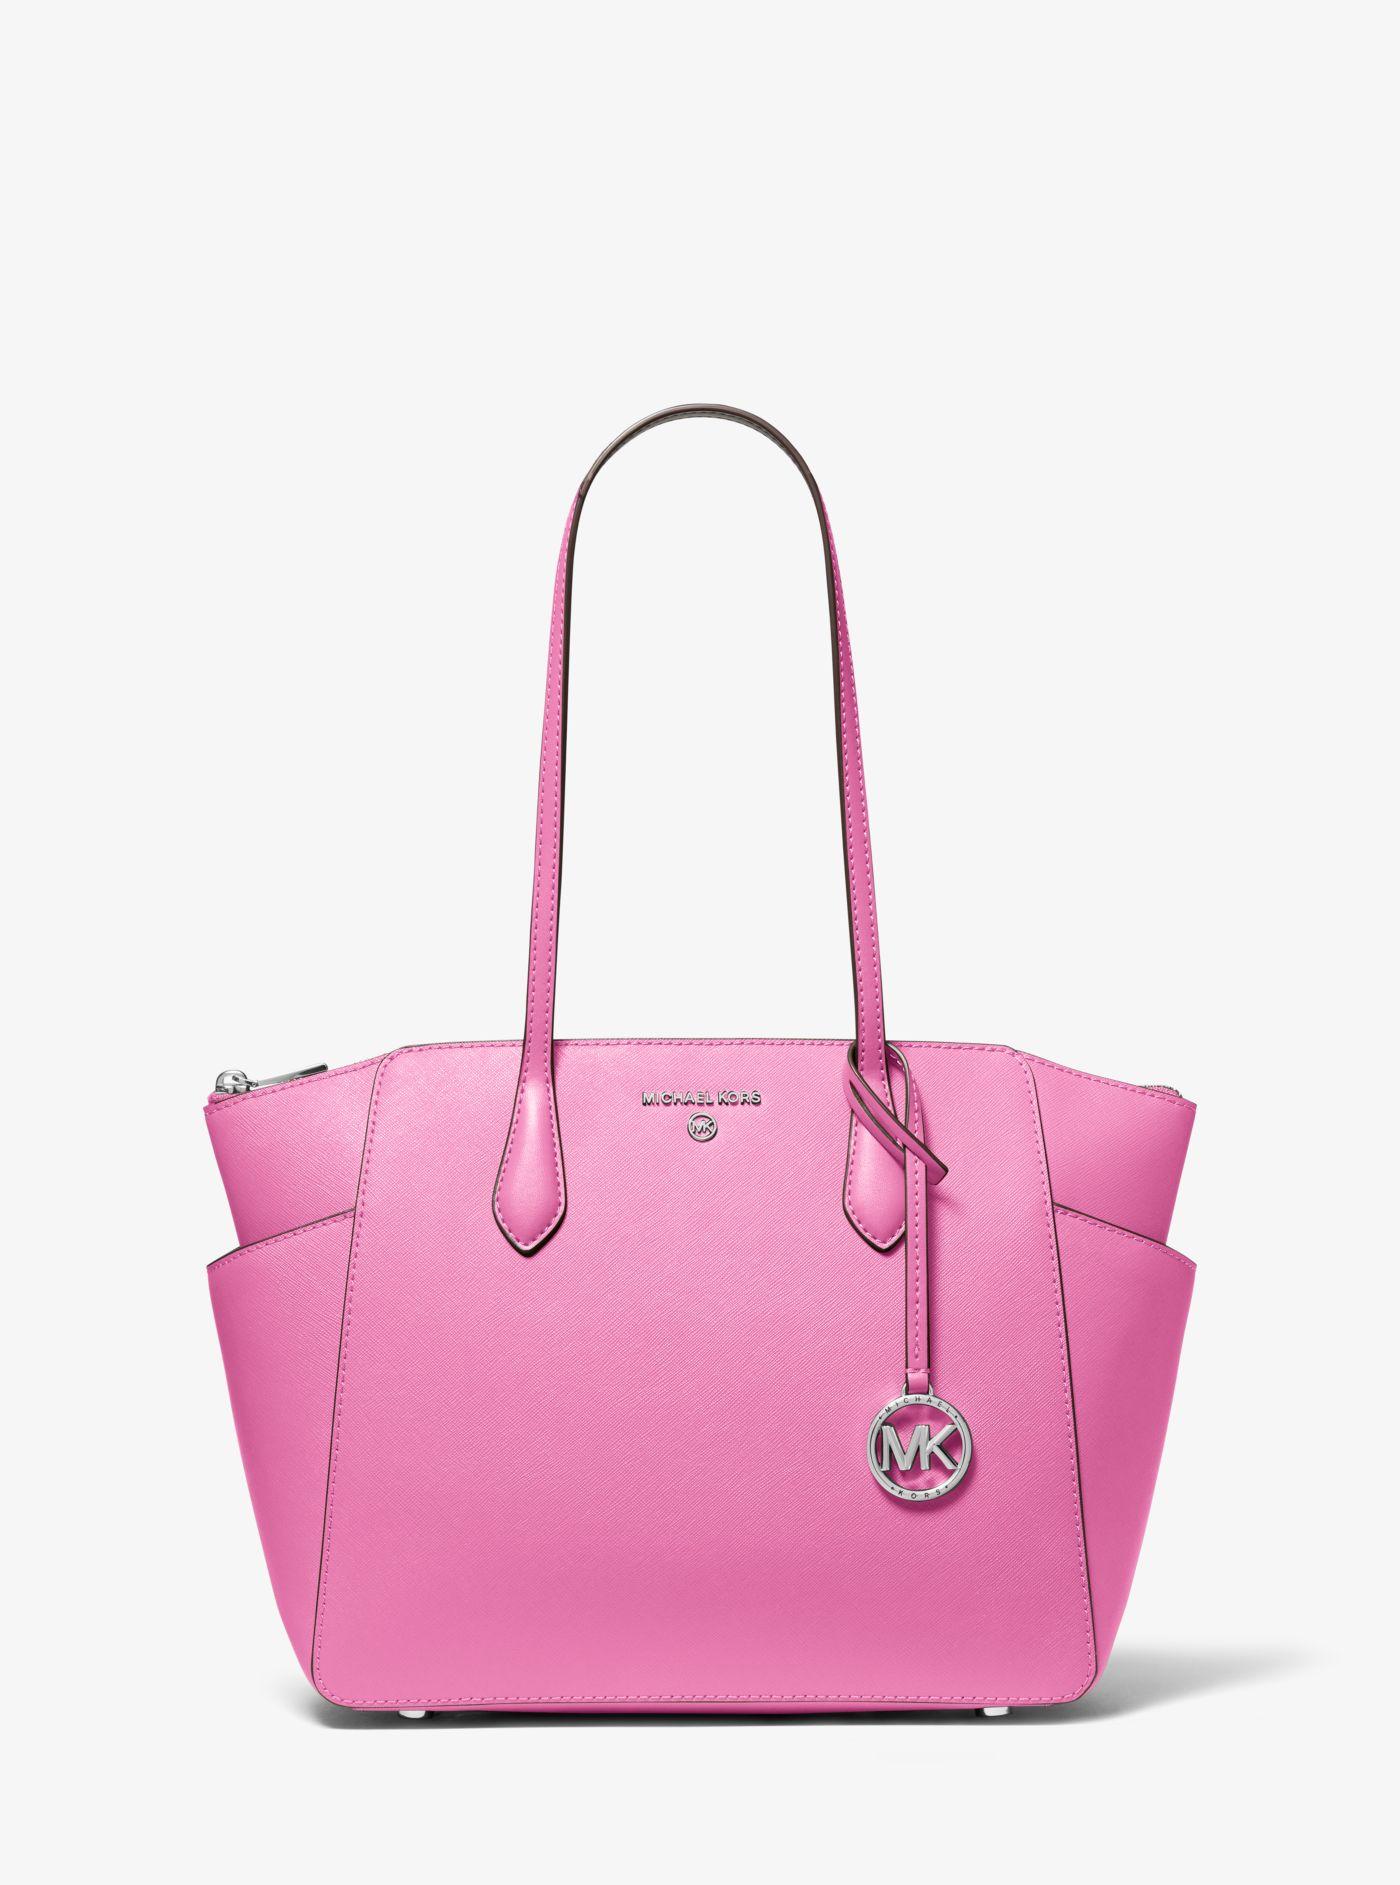 Michael Kors Marilyn Medium Saffiano Leather Tote Bag in Pink | Lyst